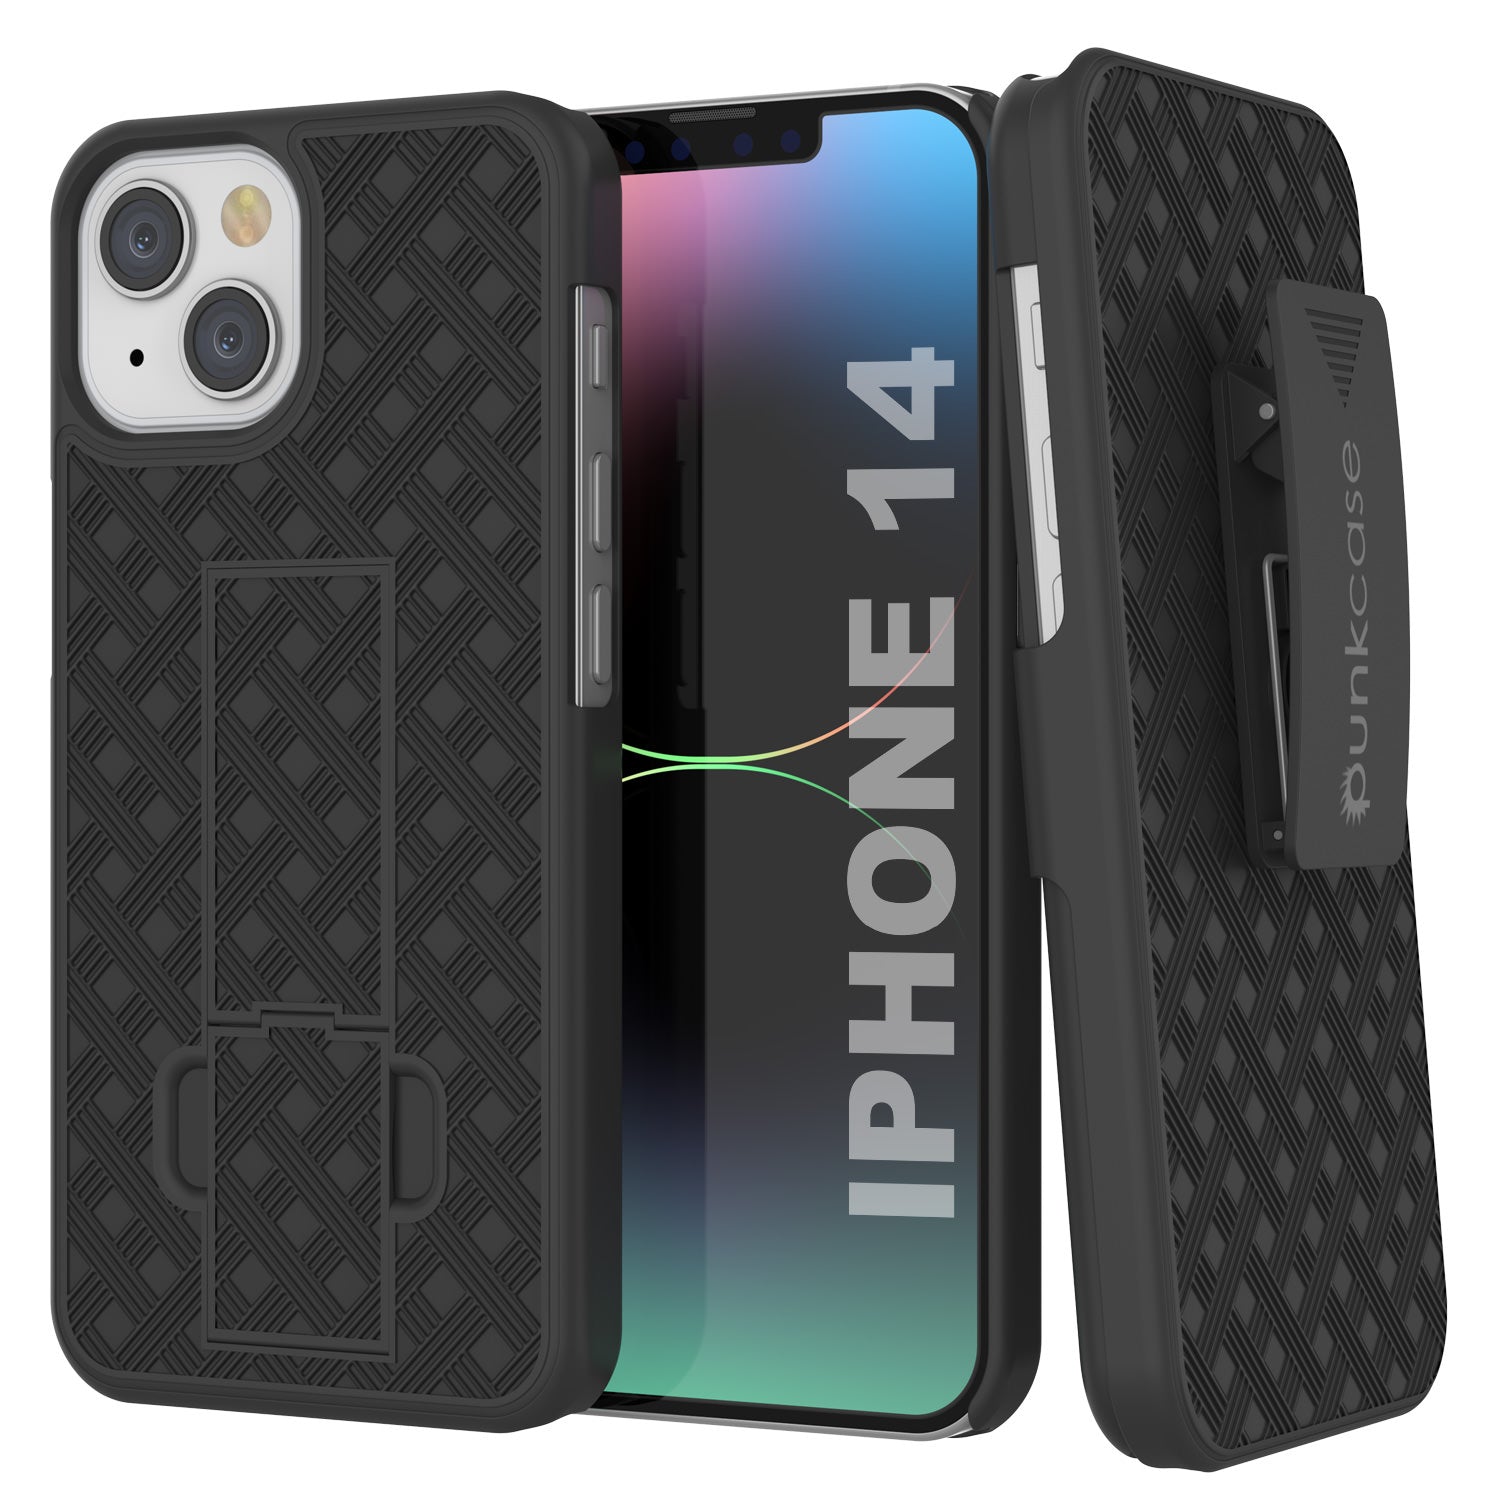 Punkcase iPhone 14 Case With Tempered Glass Screen Protector, Holster Belt Clip & Built-In Kickstand [Black]